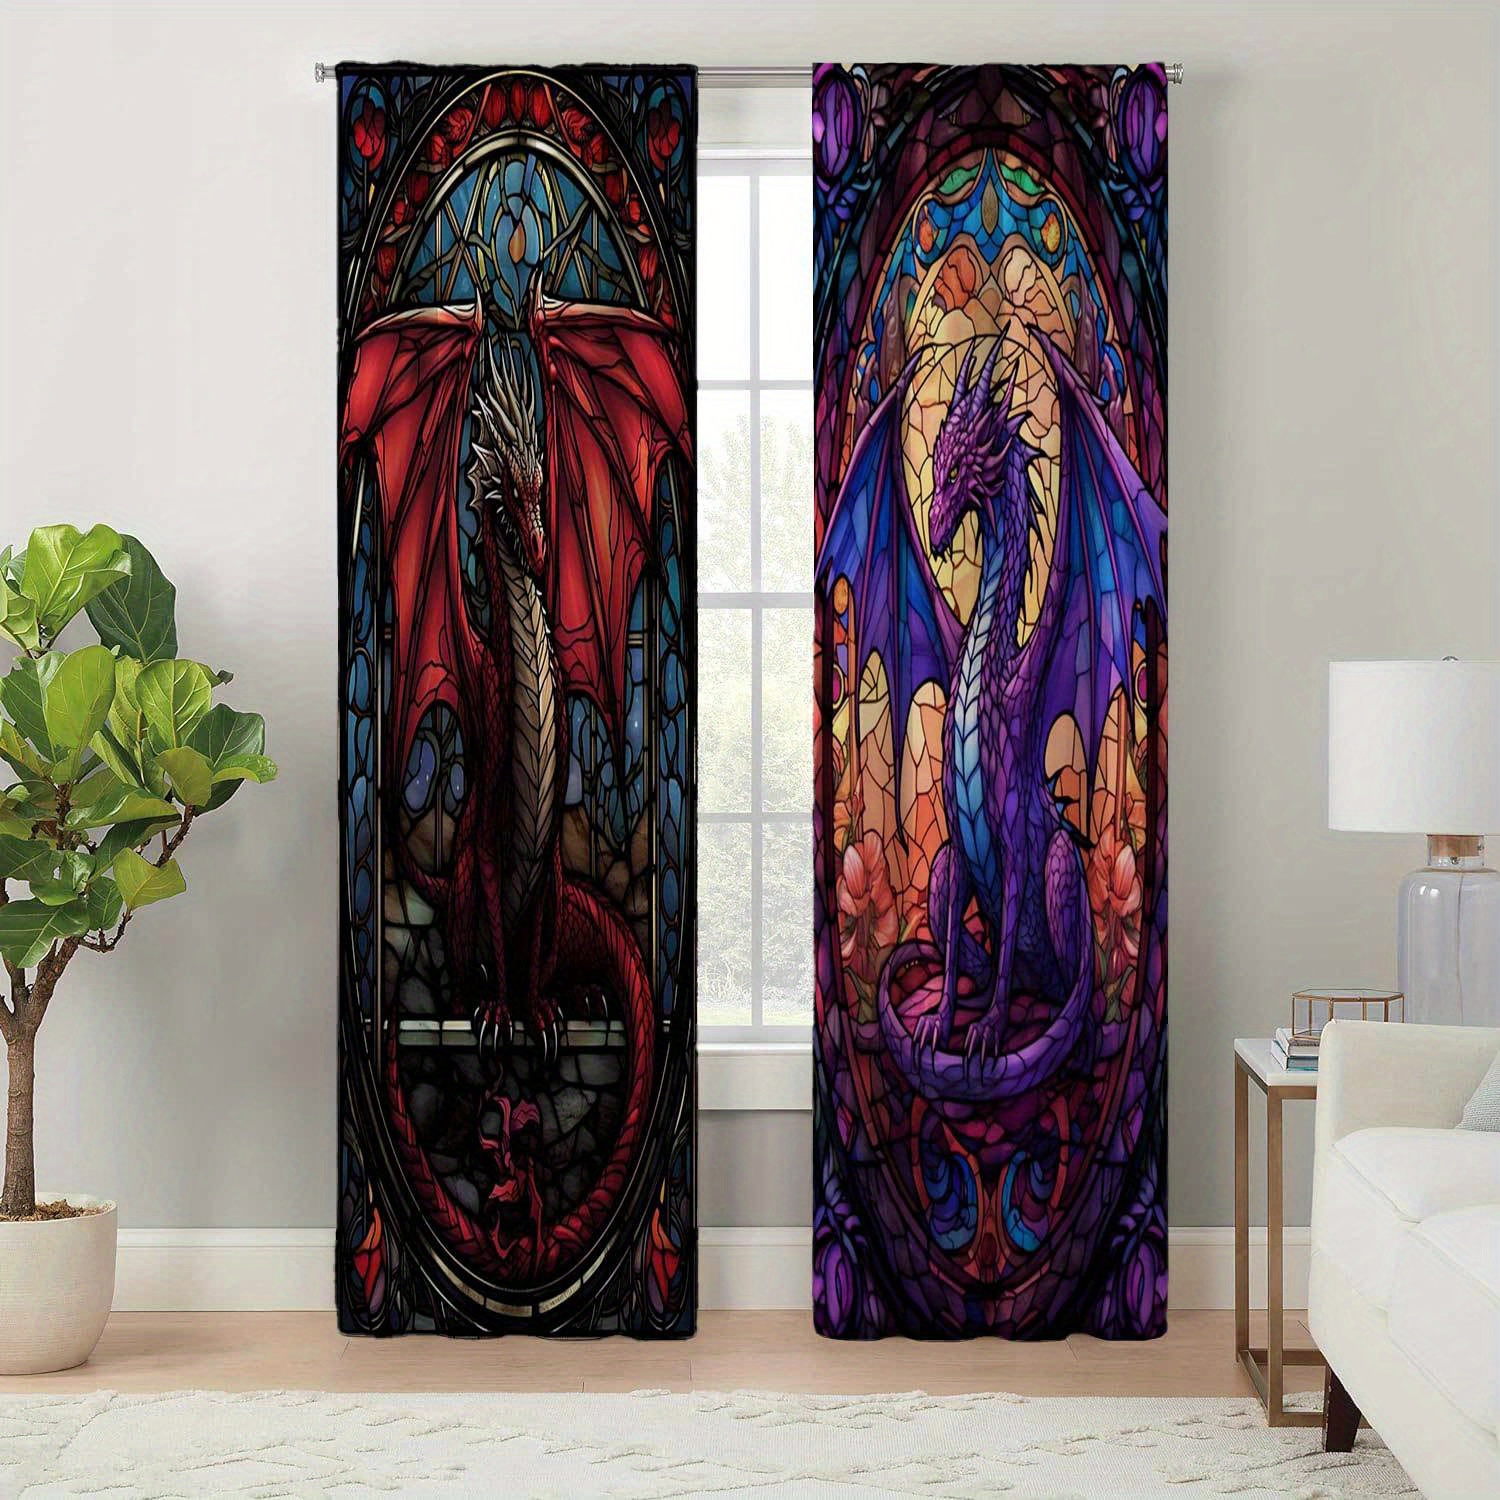 

2pcs/set, Modern Style Living Room Decor Curtains, Gothic-style Curtains Featuring Dragon Patterns, Easy Care, 4 Seasons Charm, Durable And Easy To Hang For Home Decor